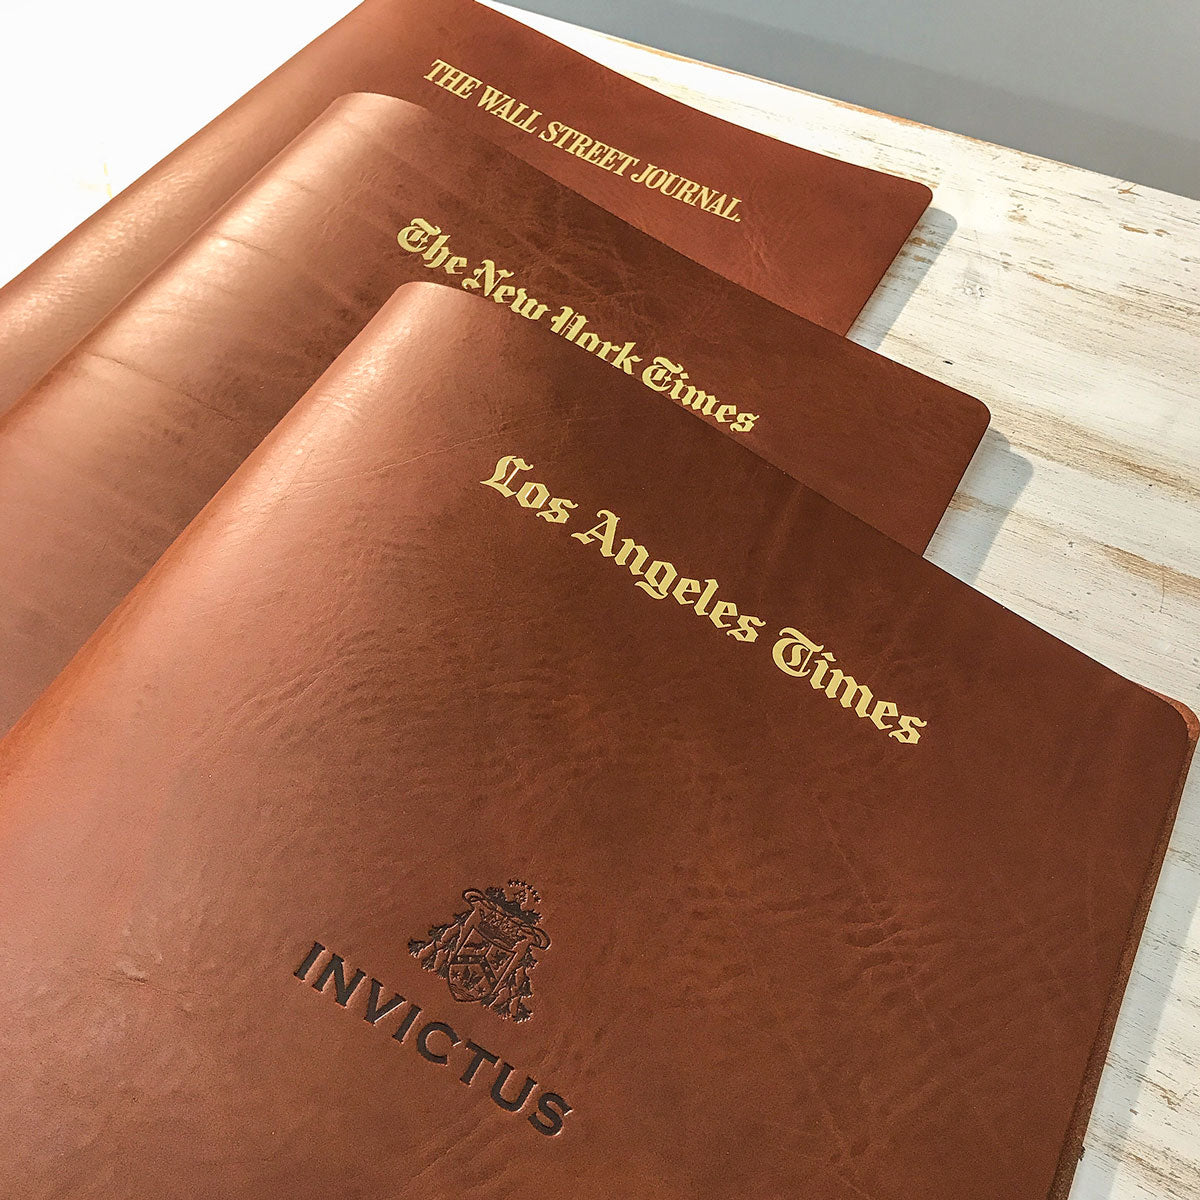 Leather binders for newspapers for use on super yacht